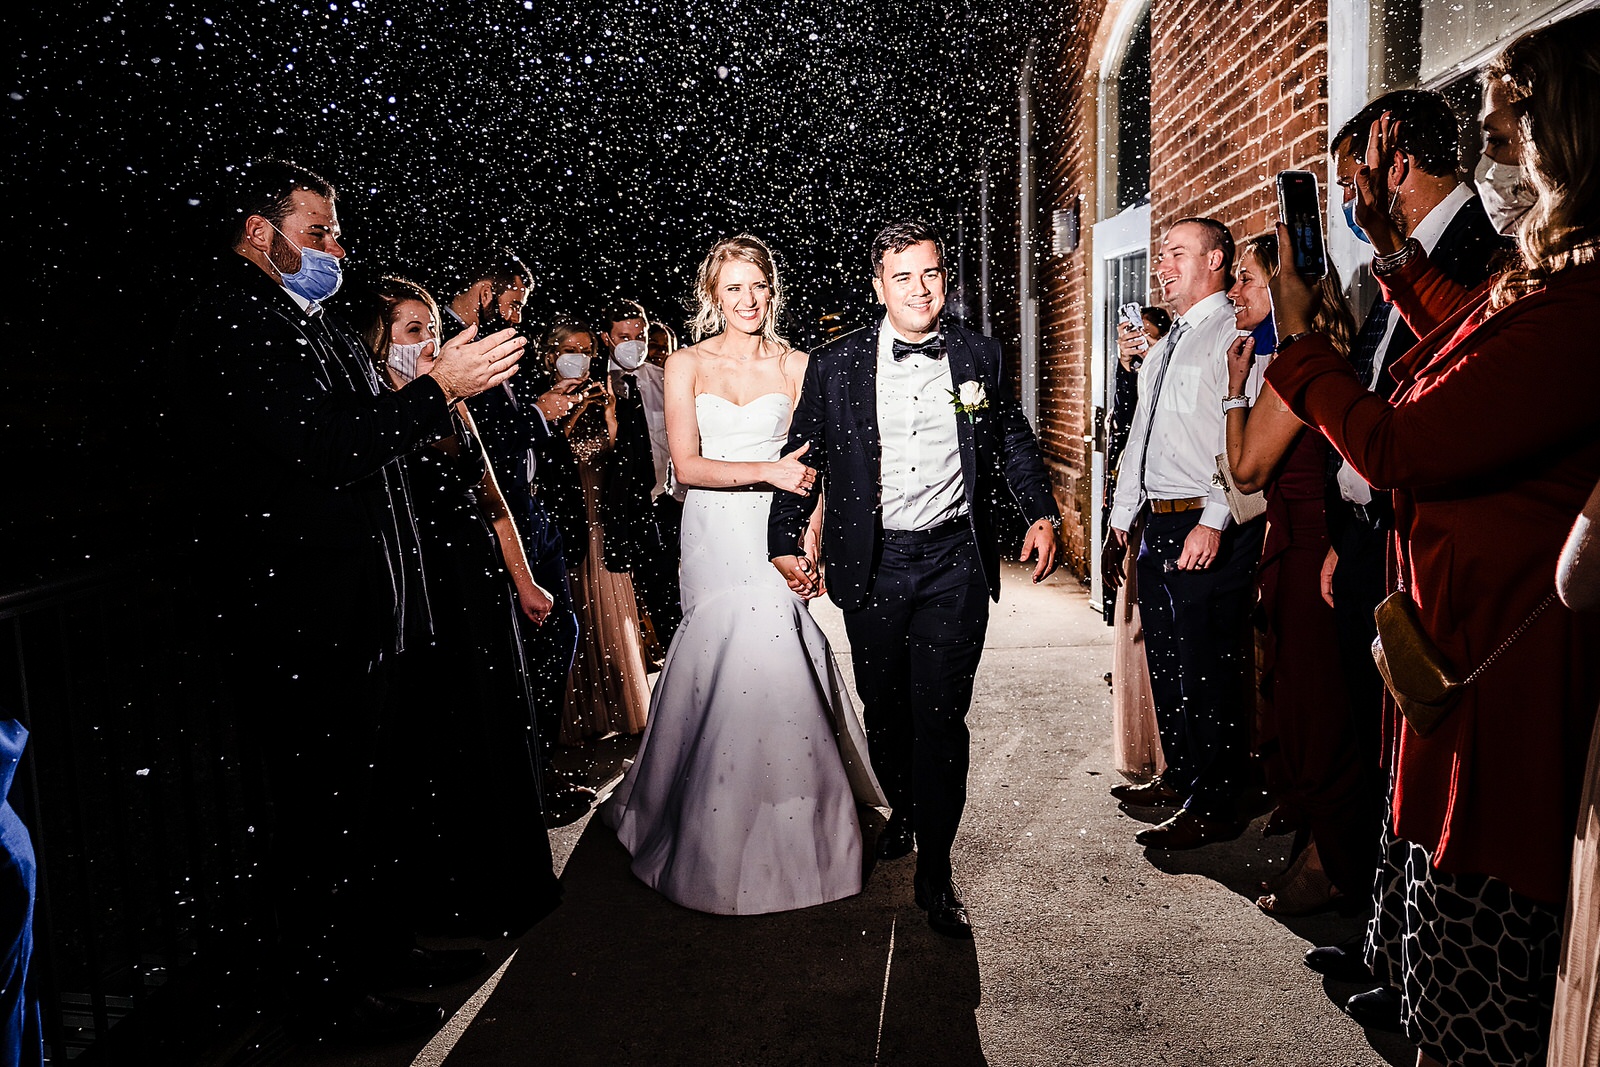 Snow machine exit at a Christmas wedding in Durham, NC